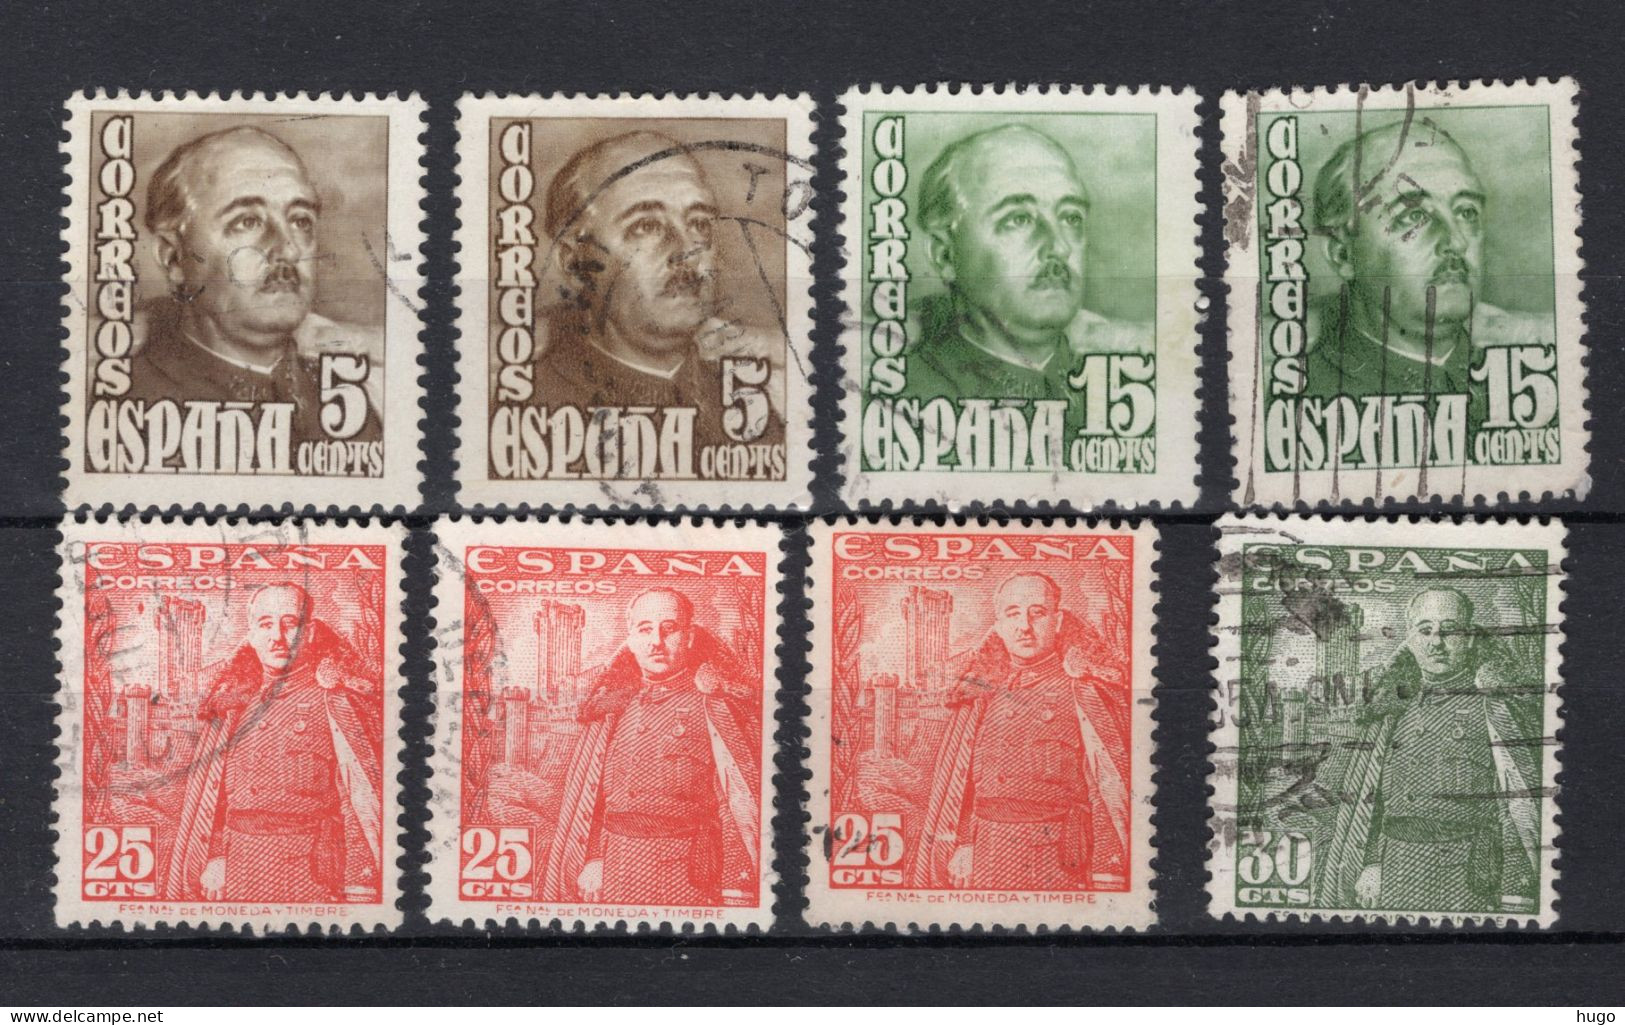 SPANJE Yt. 764A/766A° Gestempeld 1948-1954 - Used Stamps